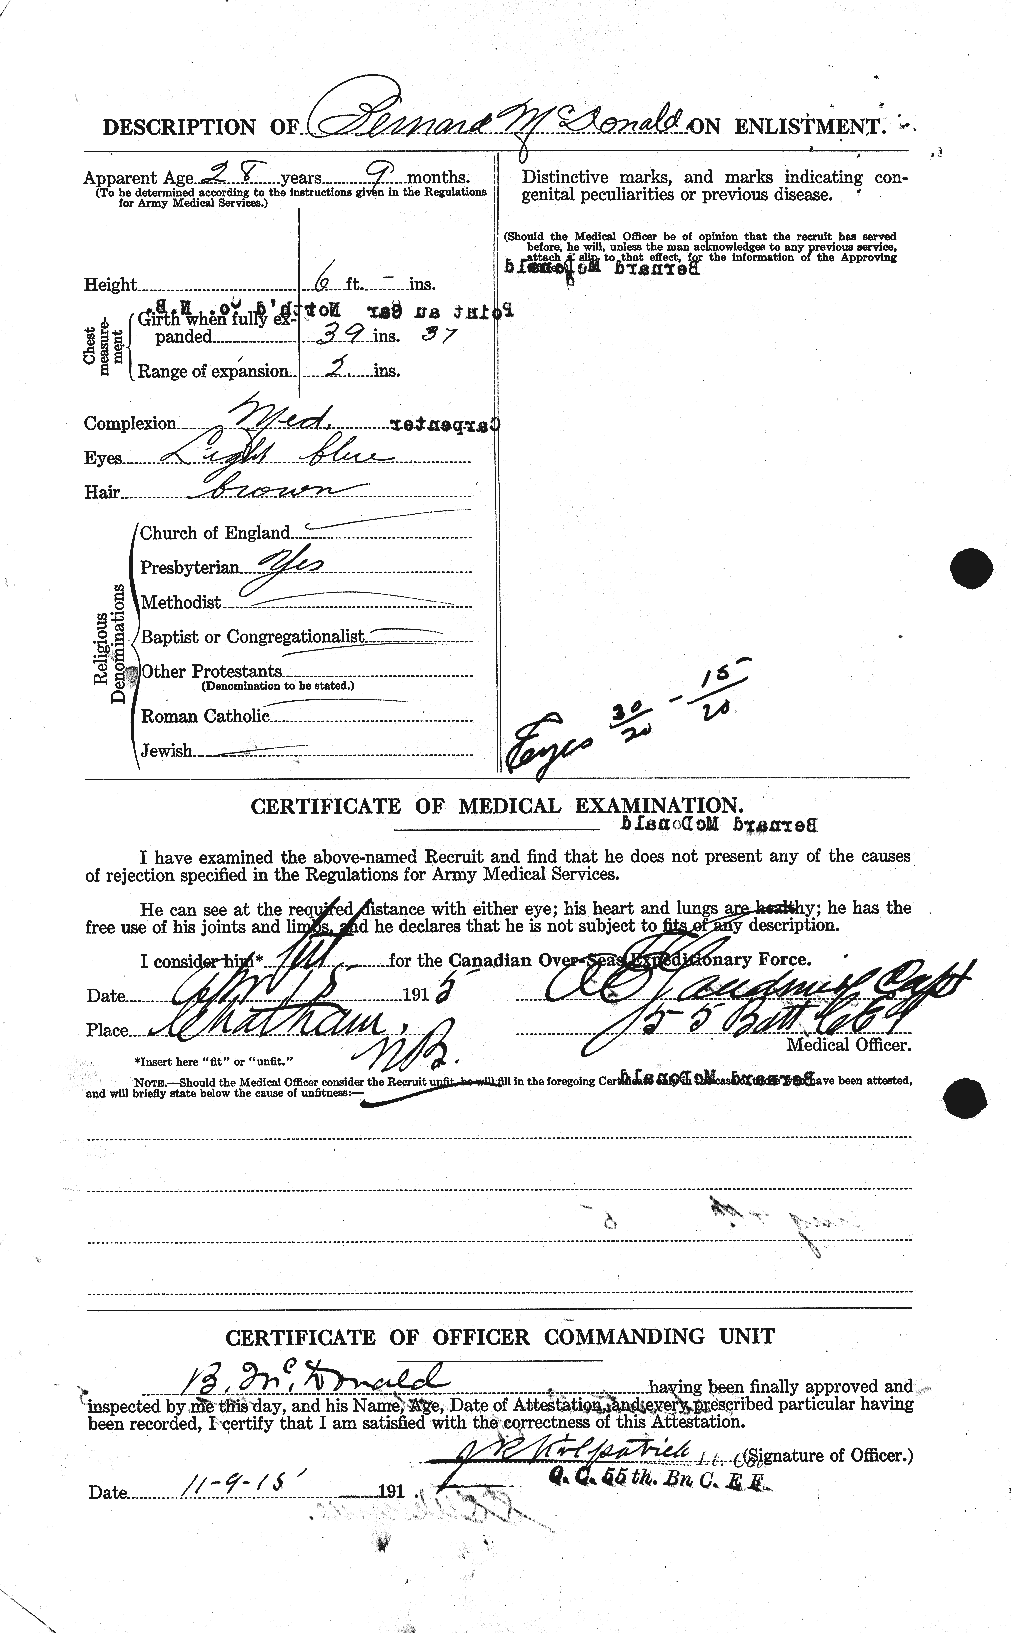 Personnel Records of the First World War - CEF 136517b